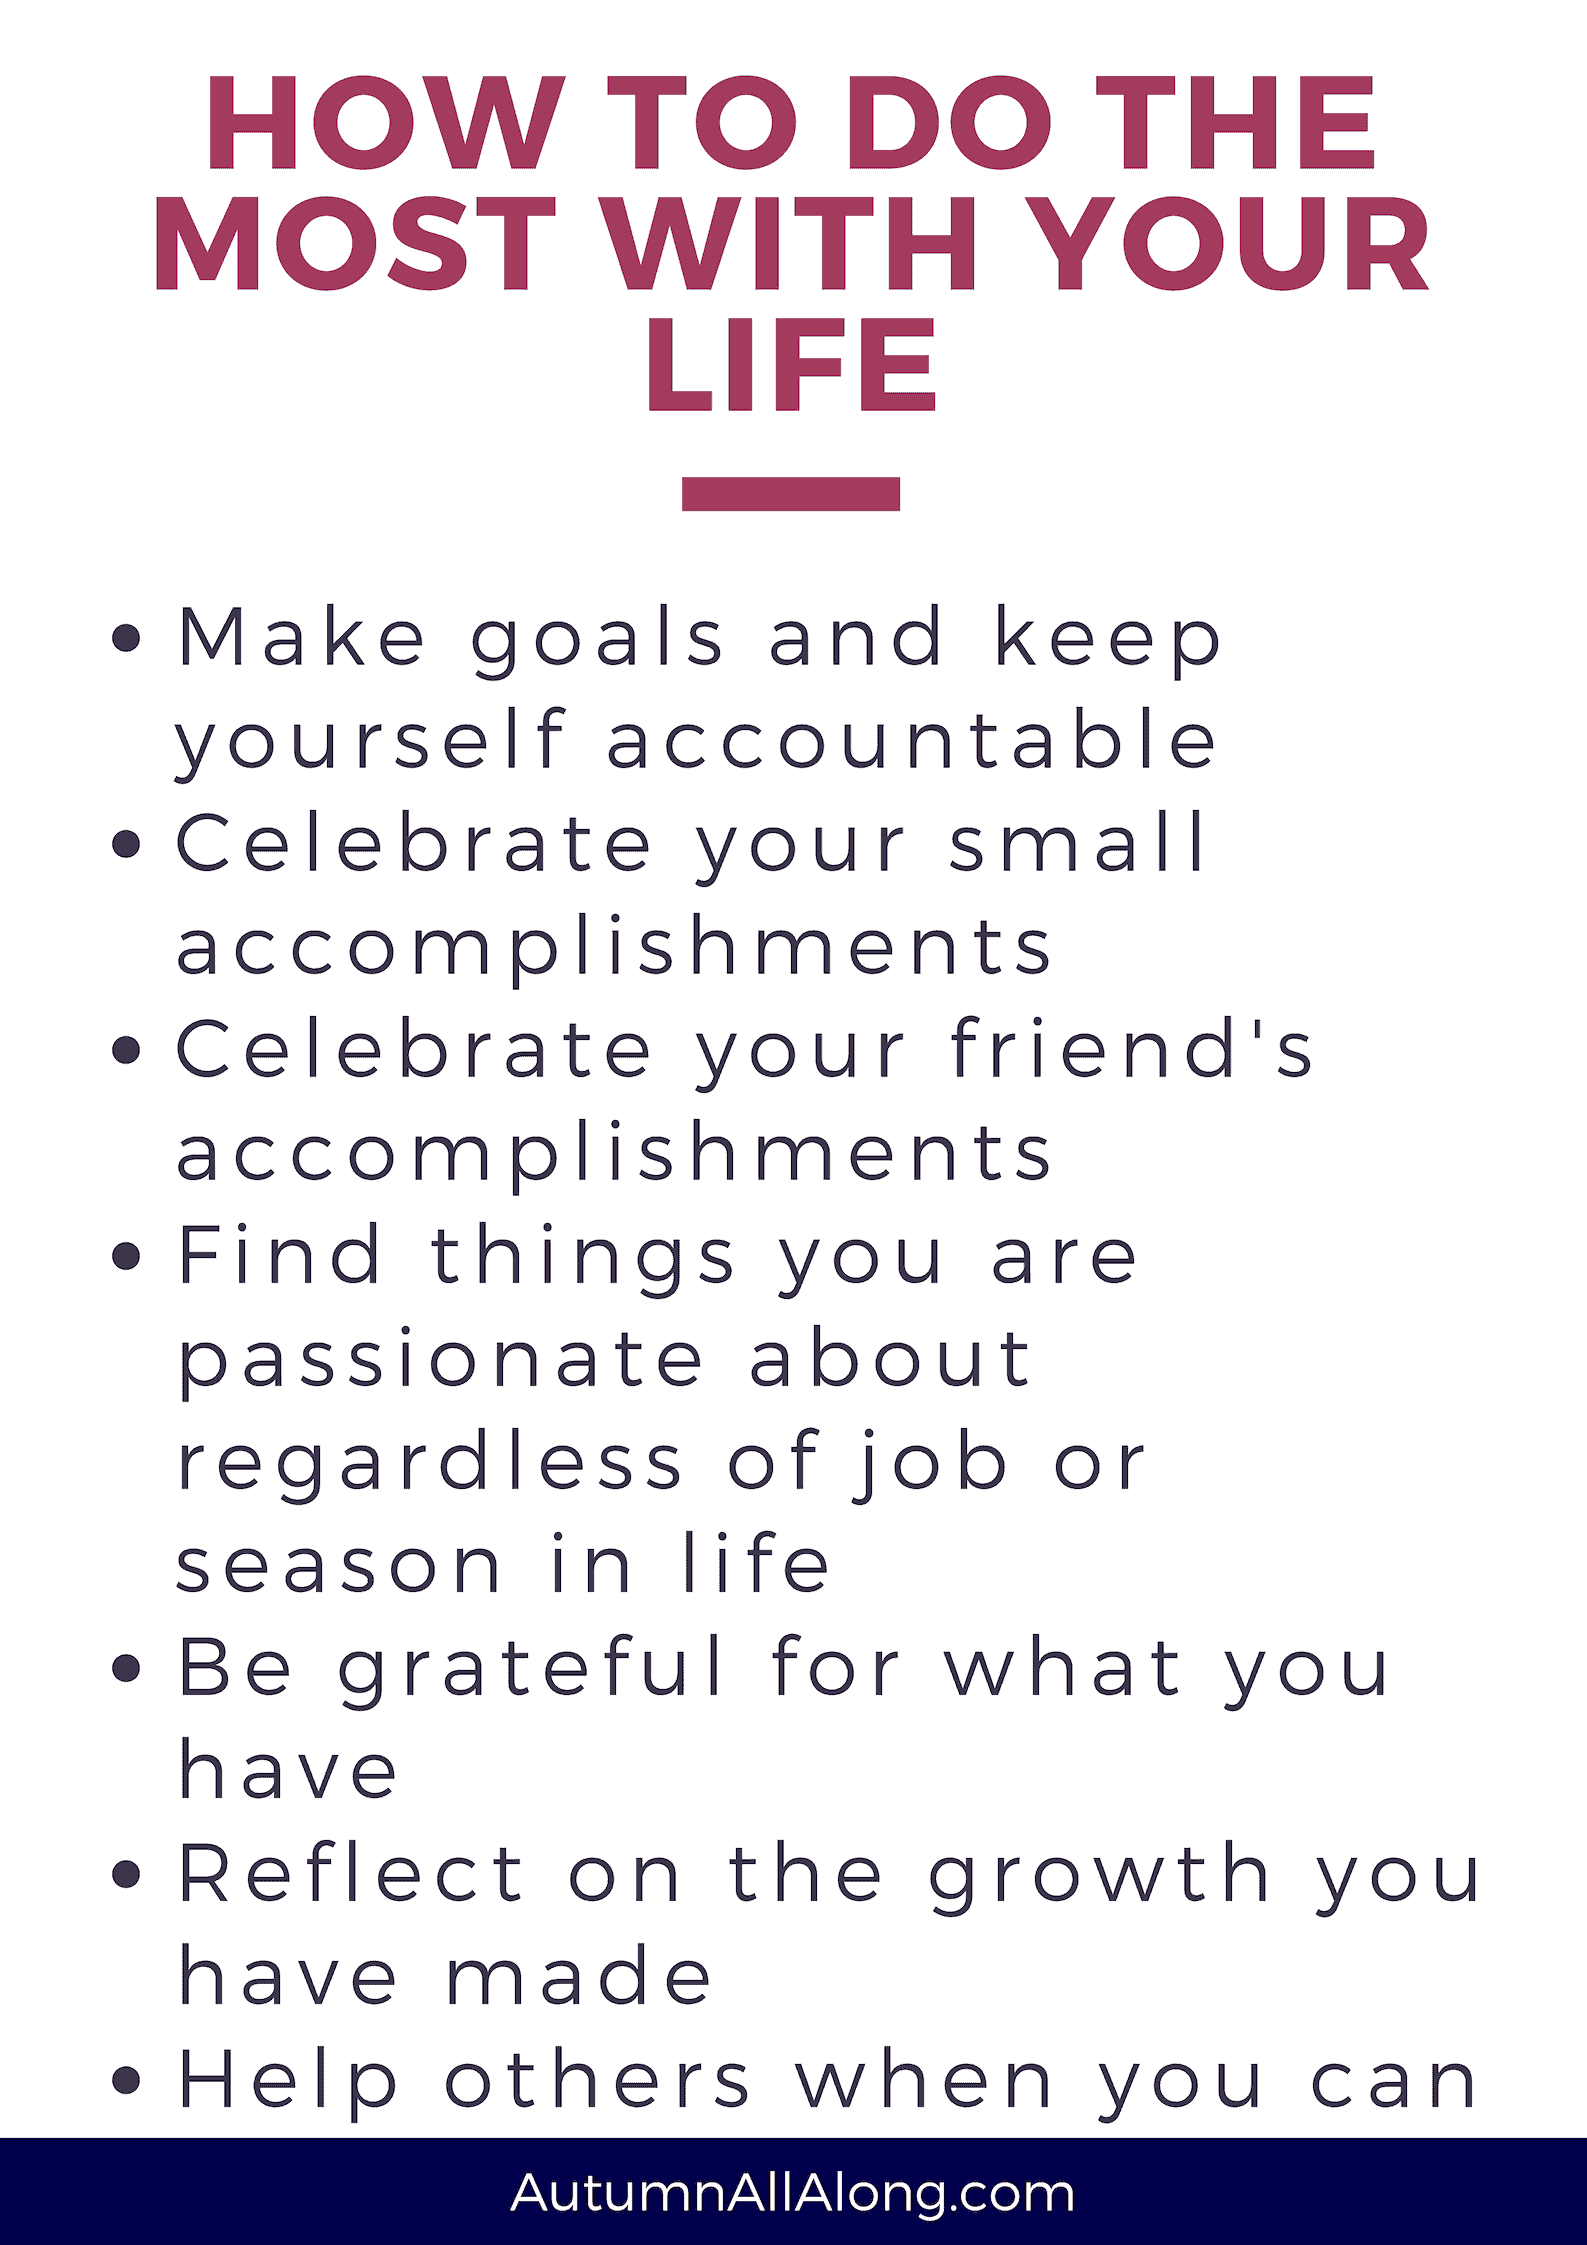 How to do the most with your life | via Autumn All Along